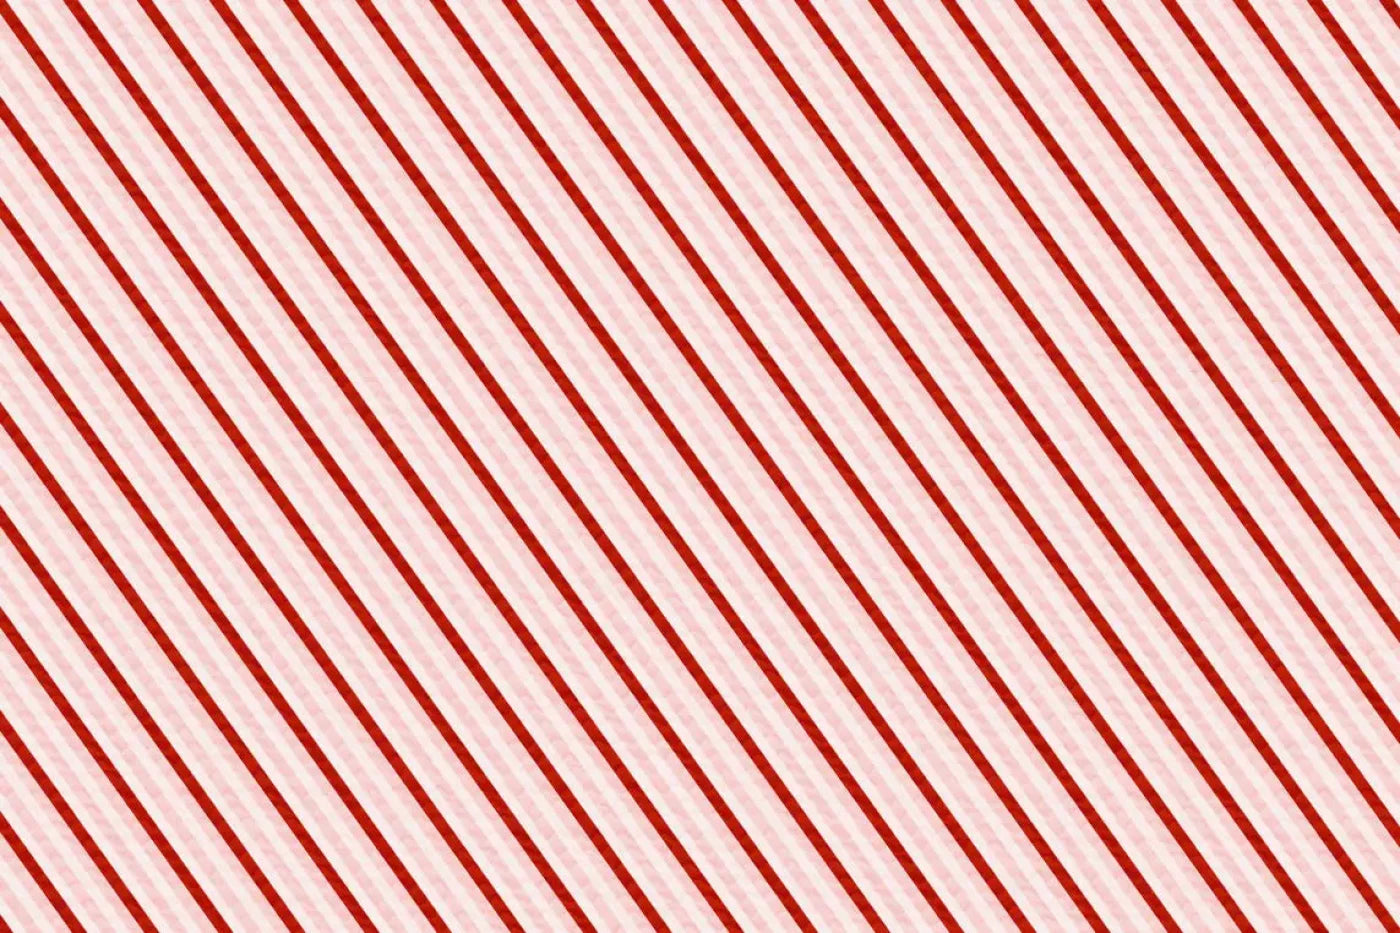 Candy Cane 5X4 Rubbermat Floor ( 60 X 48 Inch ) Backdrop